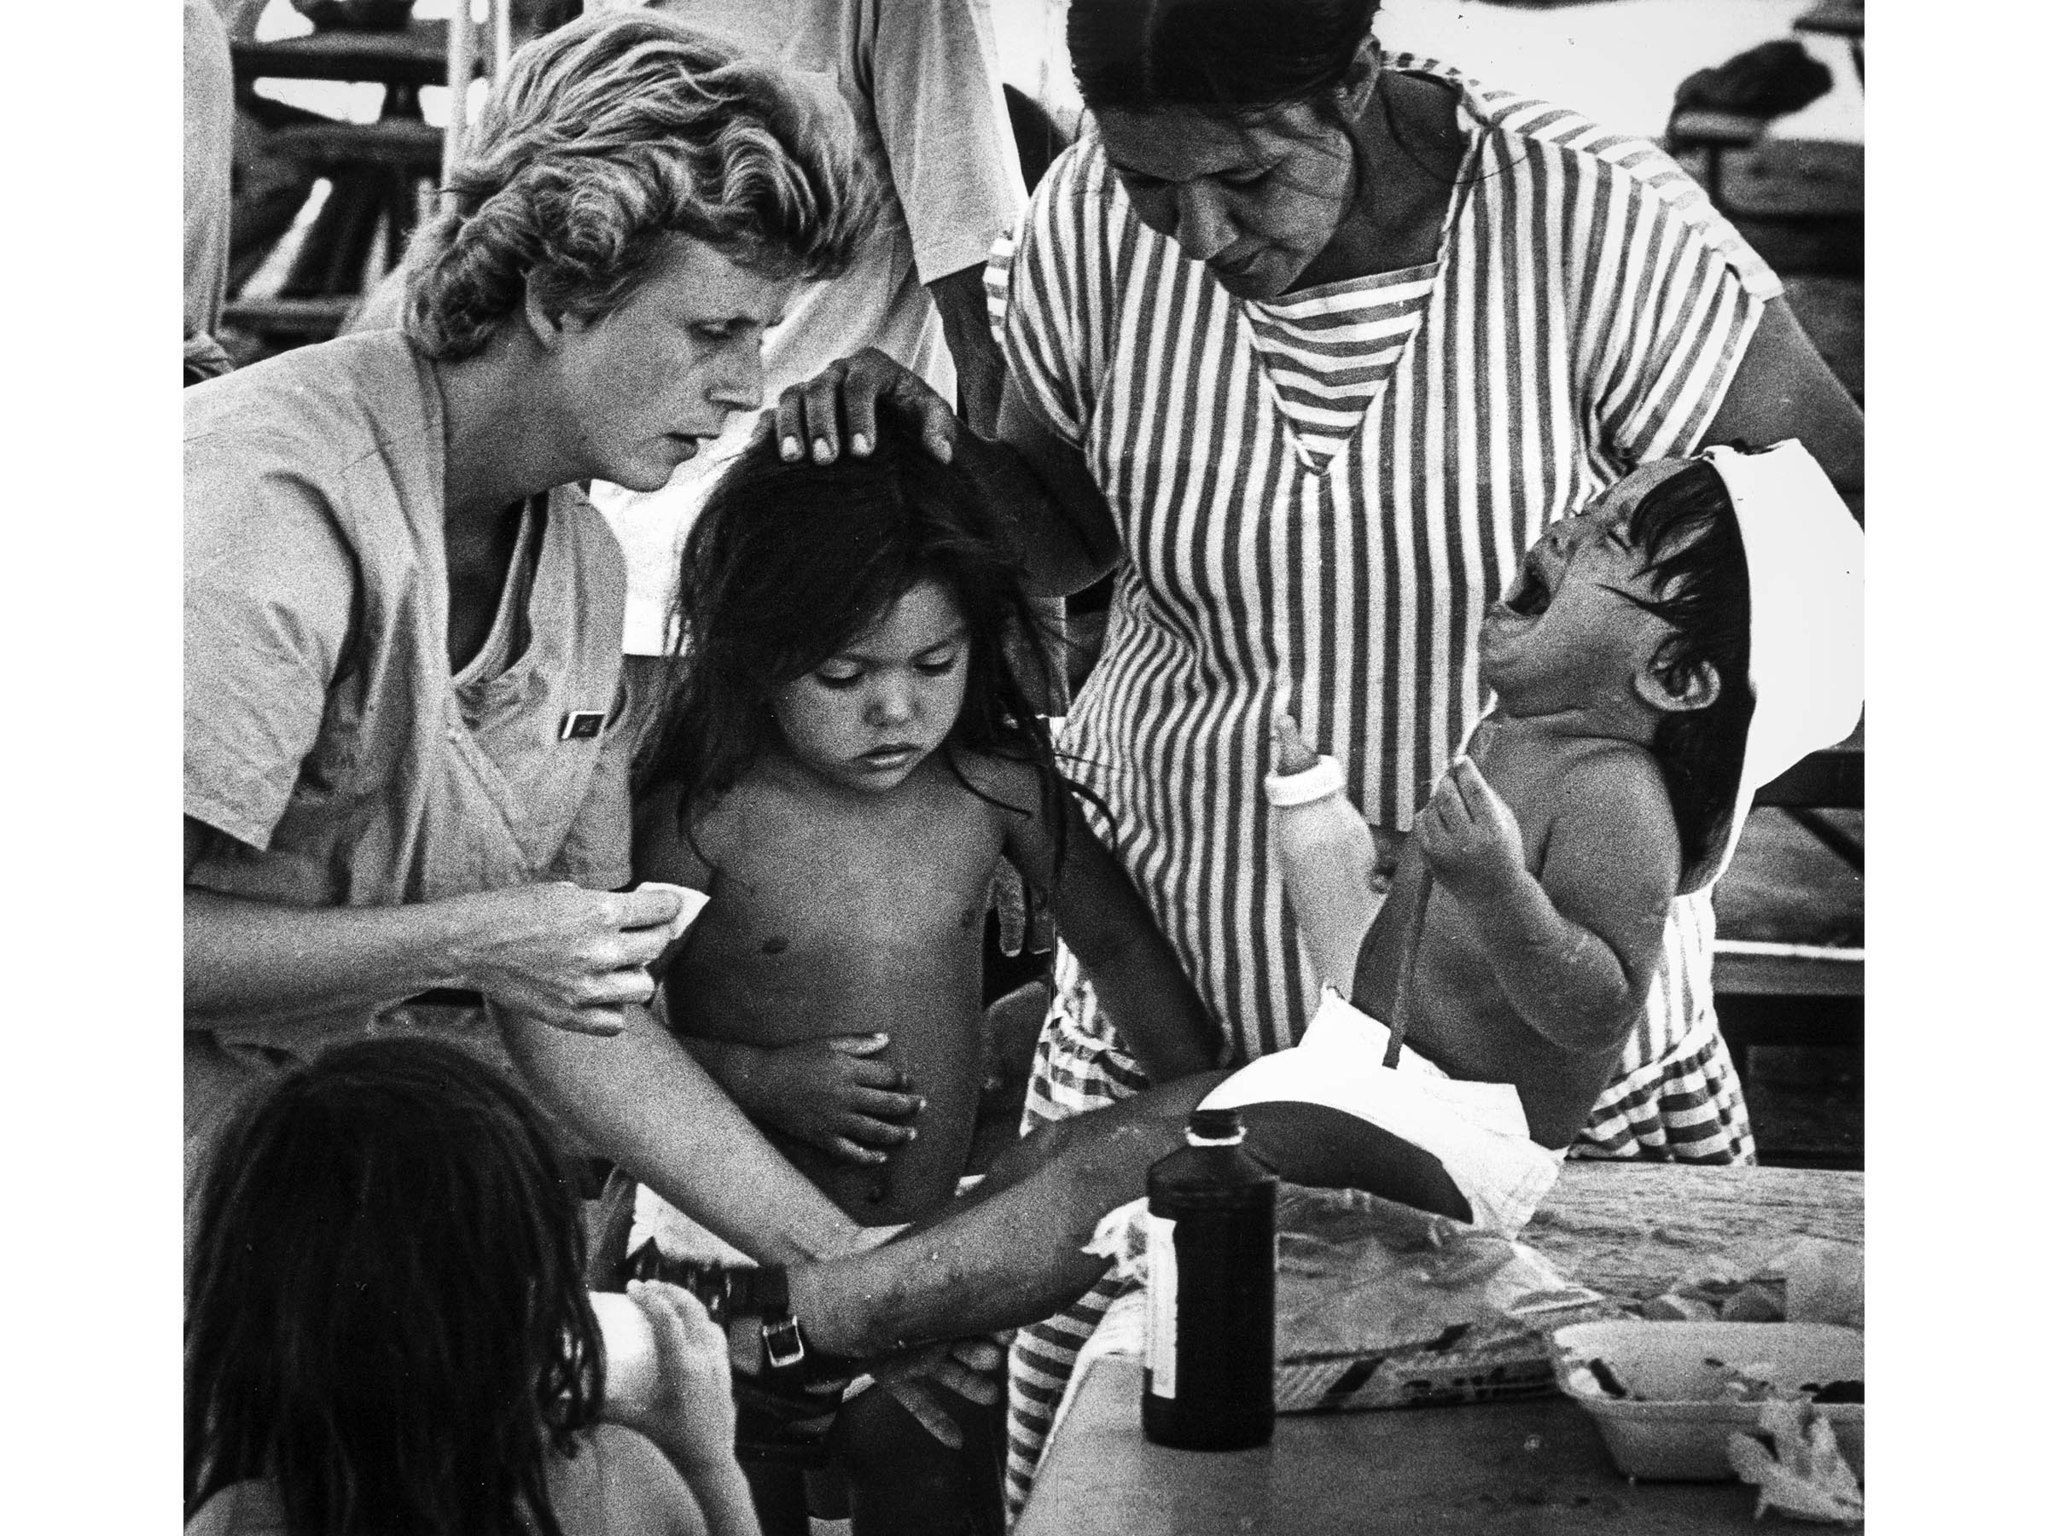 July 15, 1987: Volunteer Janice Estes of Fullerton examines 2-year-old boy with sores at Urban Campg